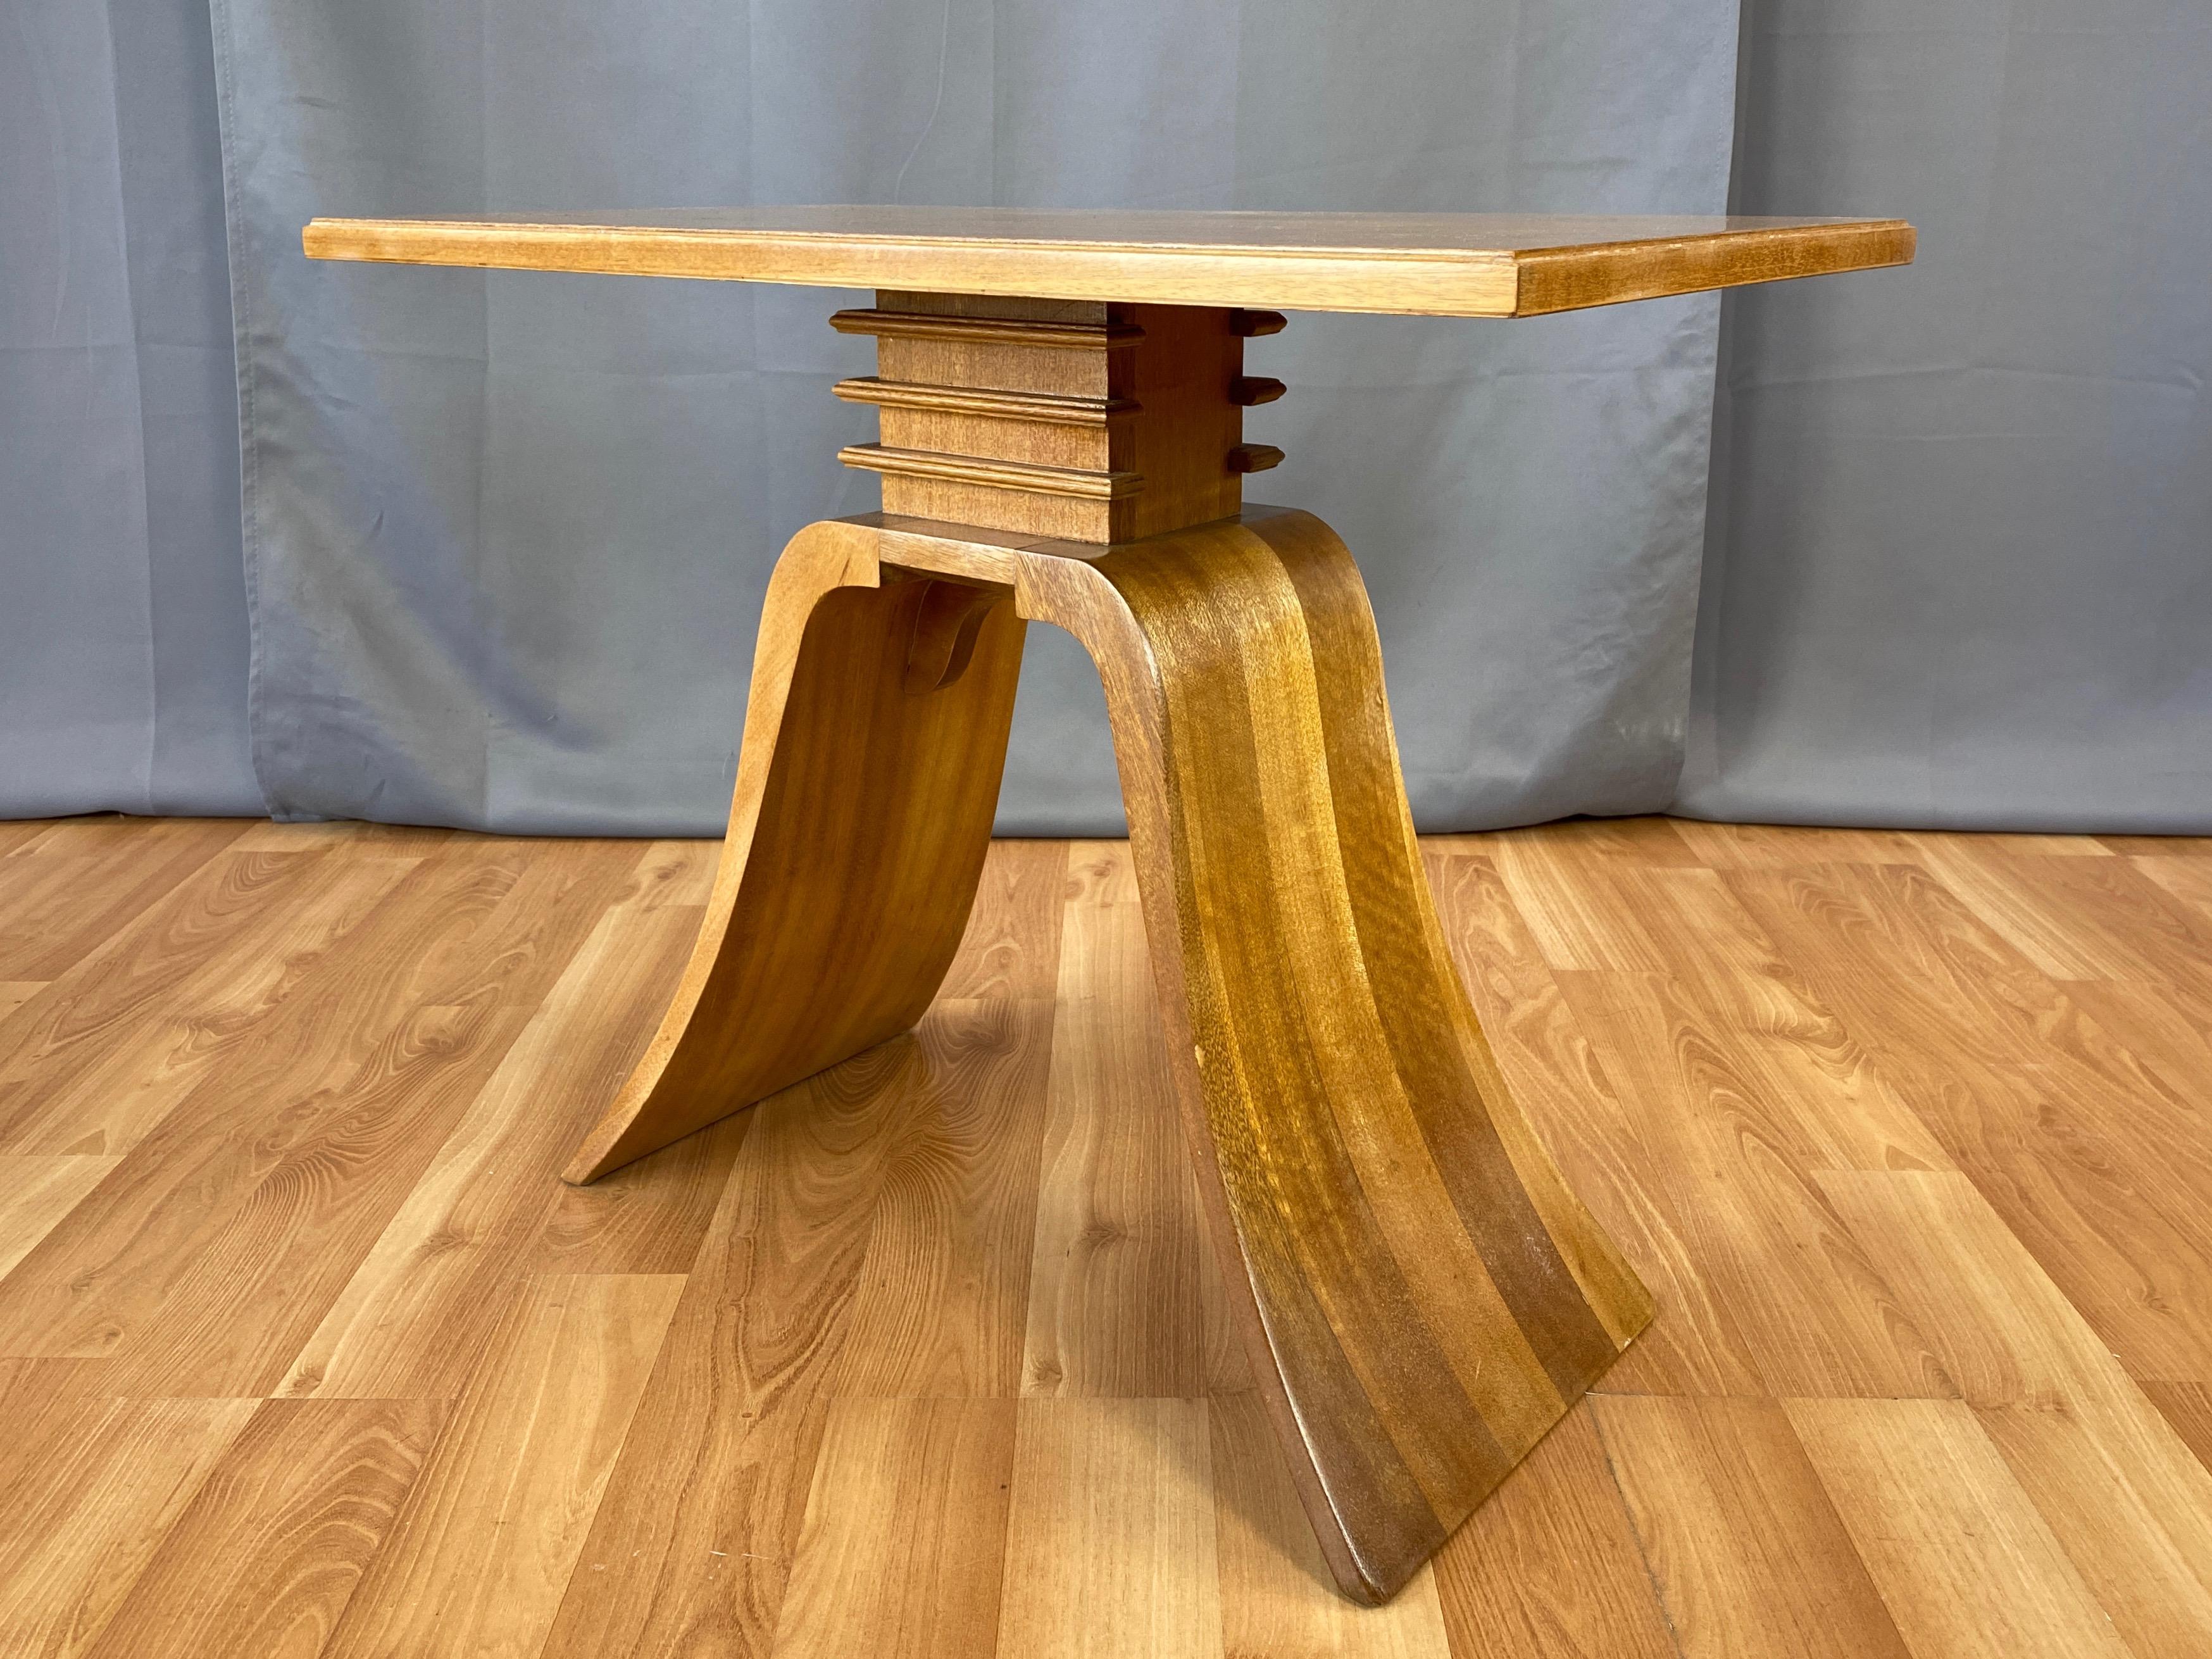 A professionally refinished late 1930s model 8088 end table in blonde ribbon mahogany by Paul Frankl for Brown-Saltman, as pictured in Emily Genauer’s 1939 book “Modern Interiors - Today and Tomorrow”.

Elegant Art Deco design distinguished by a